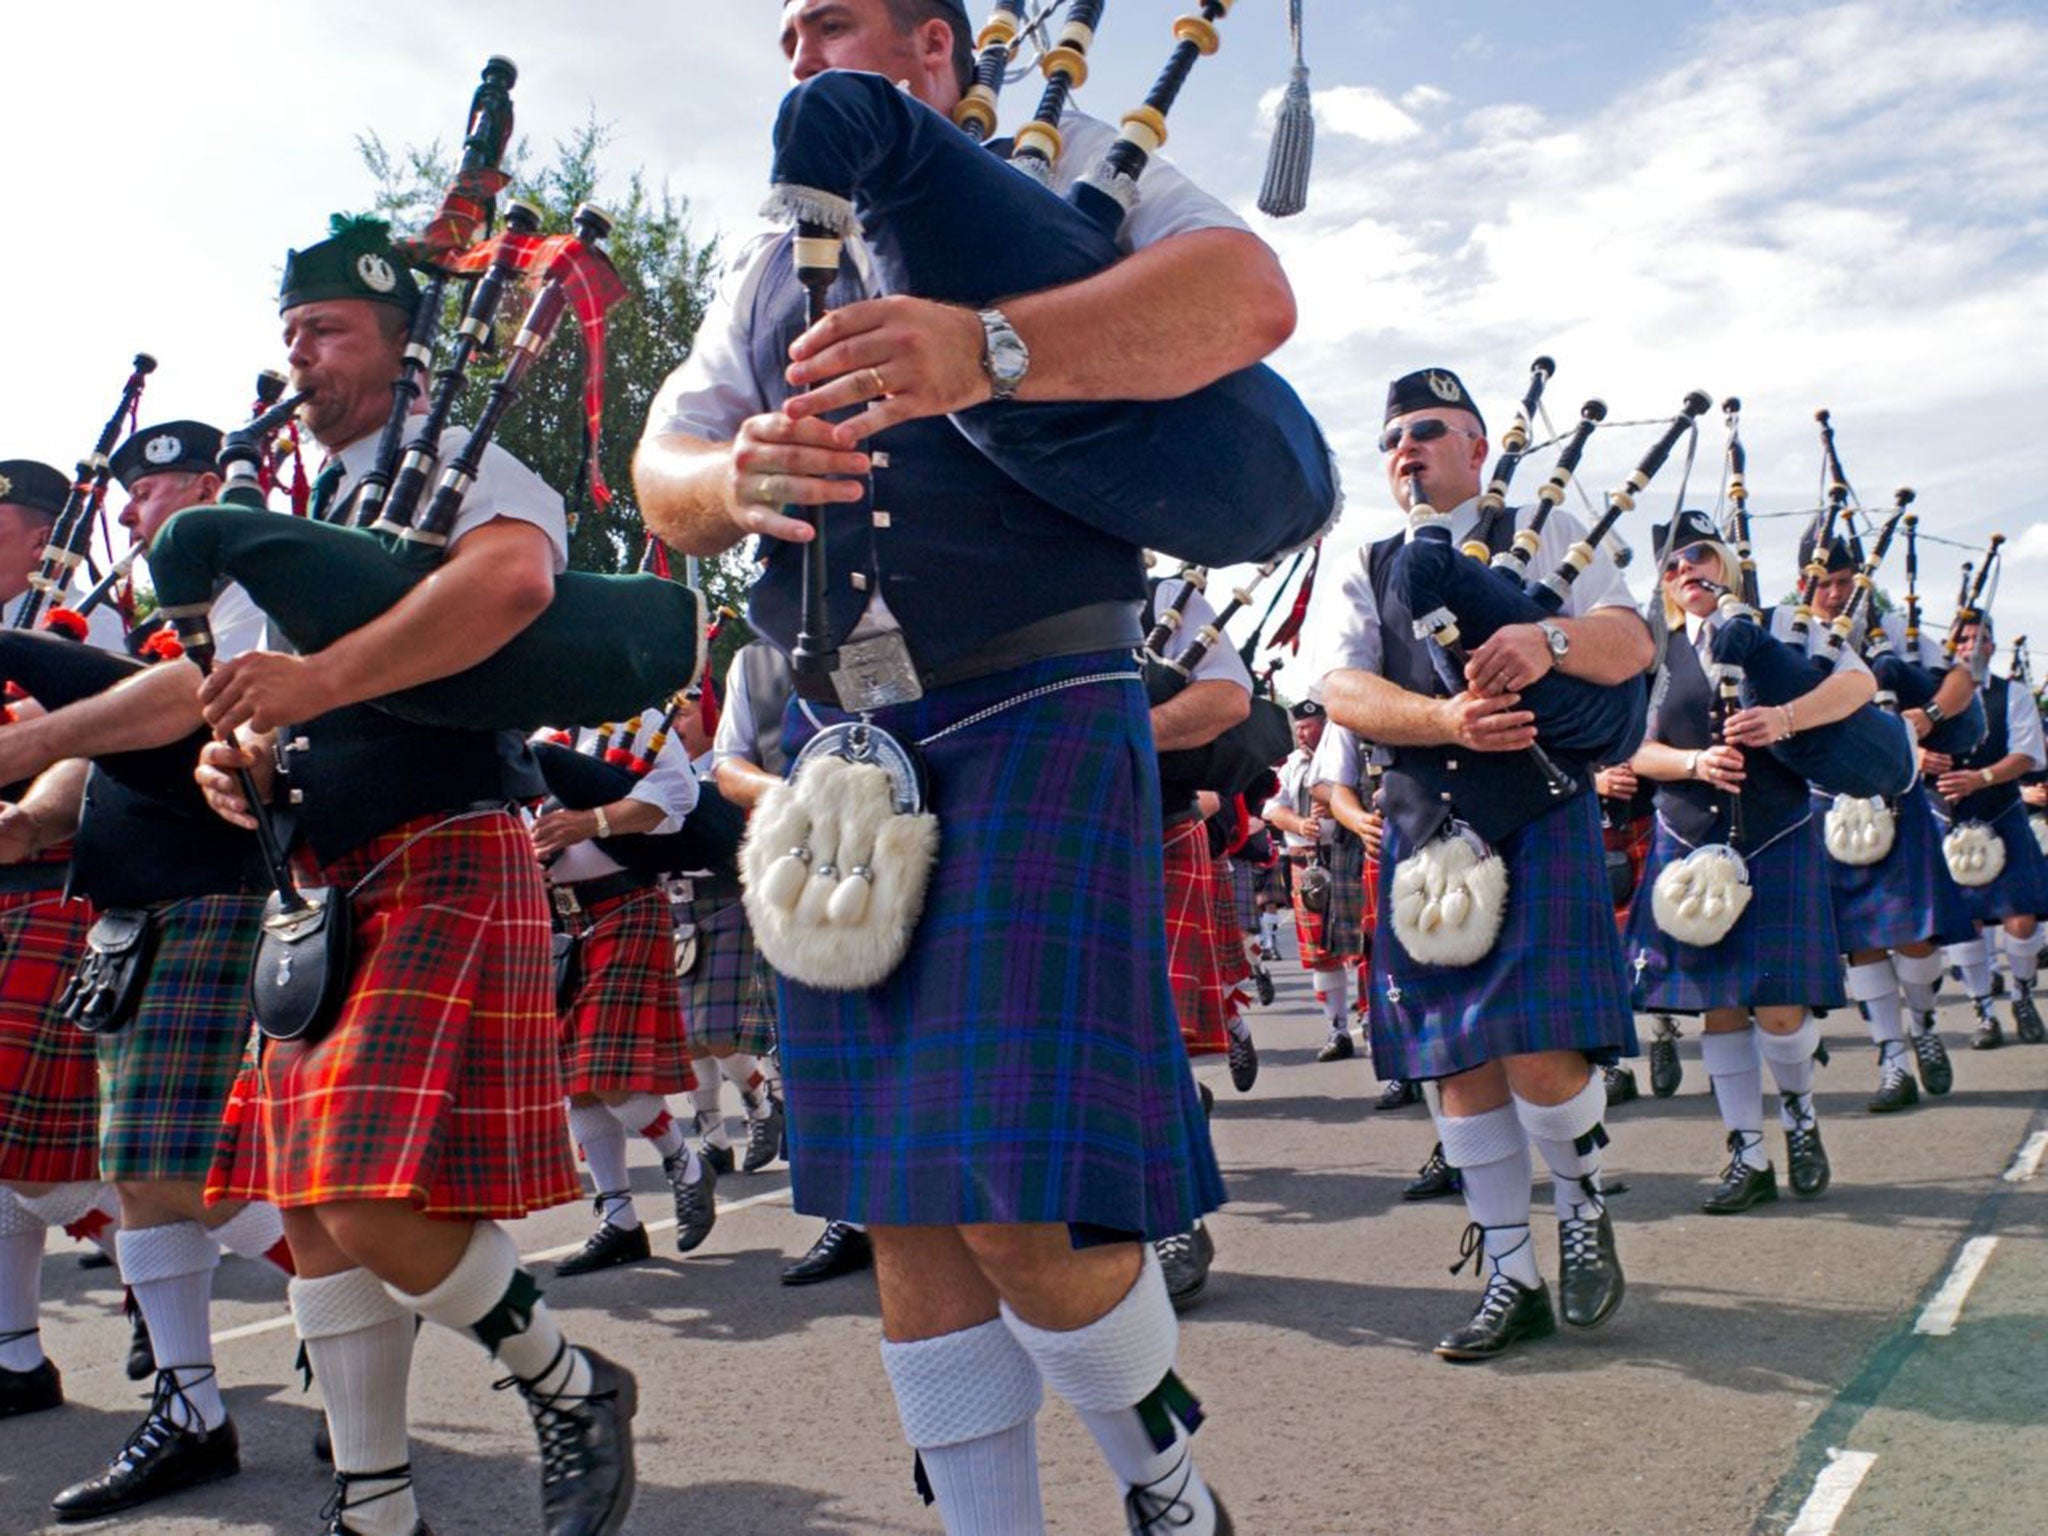 Massed pipe bands at the Highland Gathering Corby Northamptonshire England